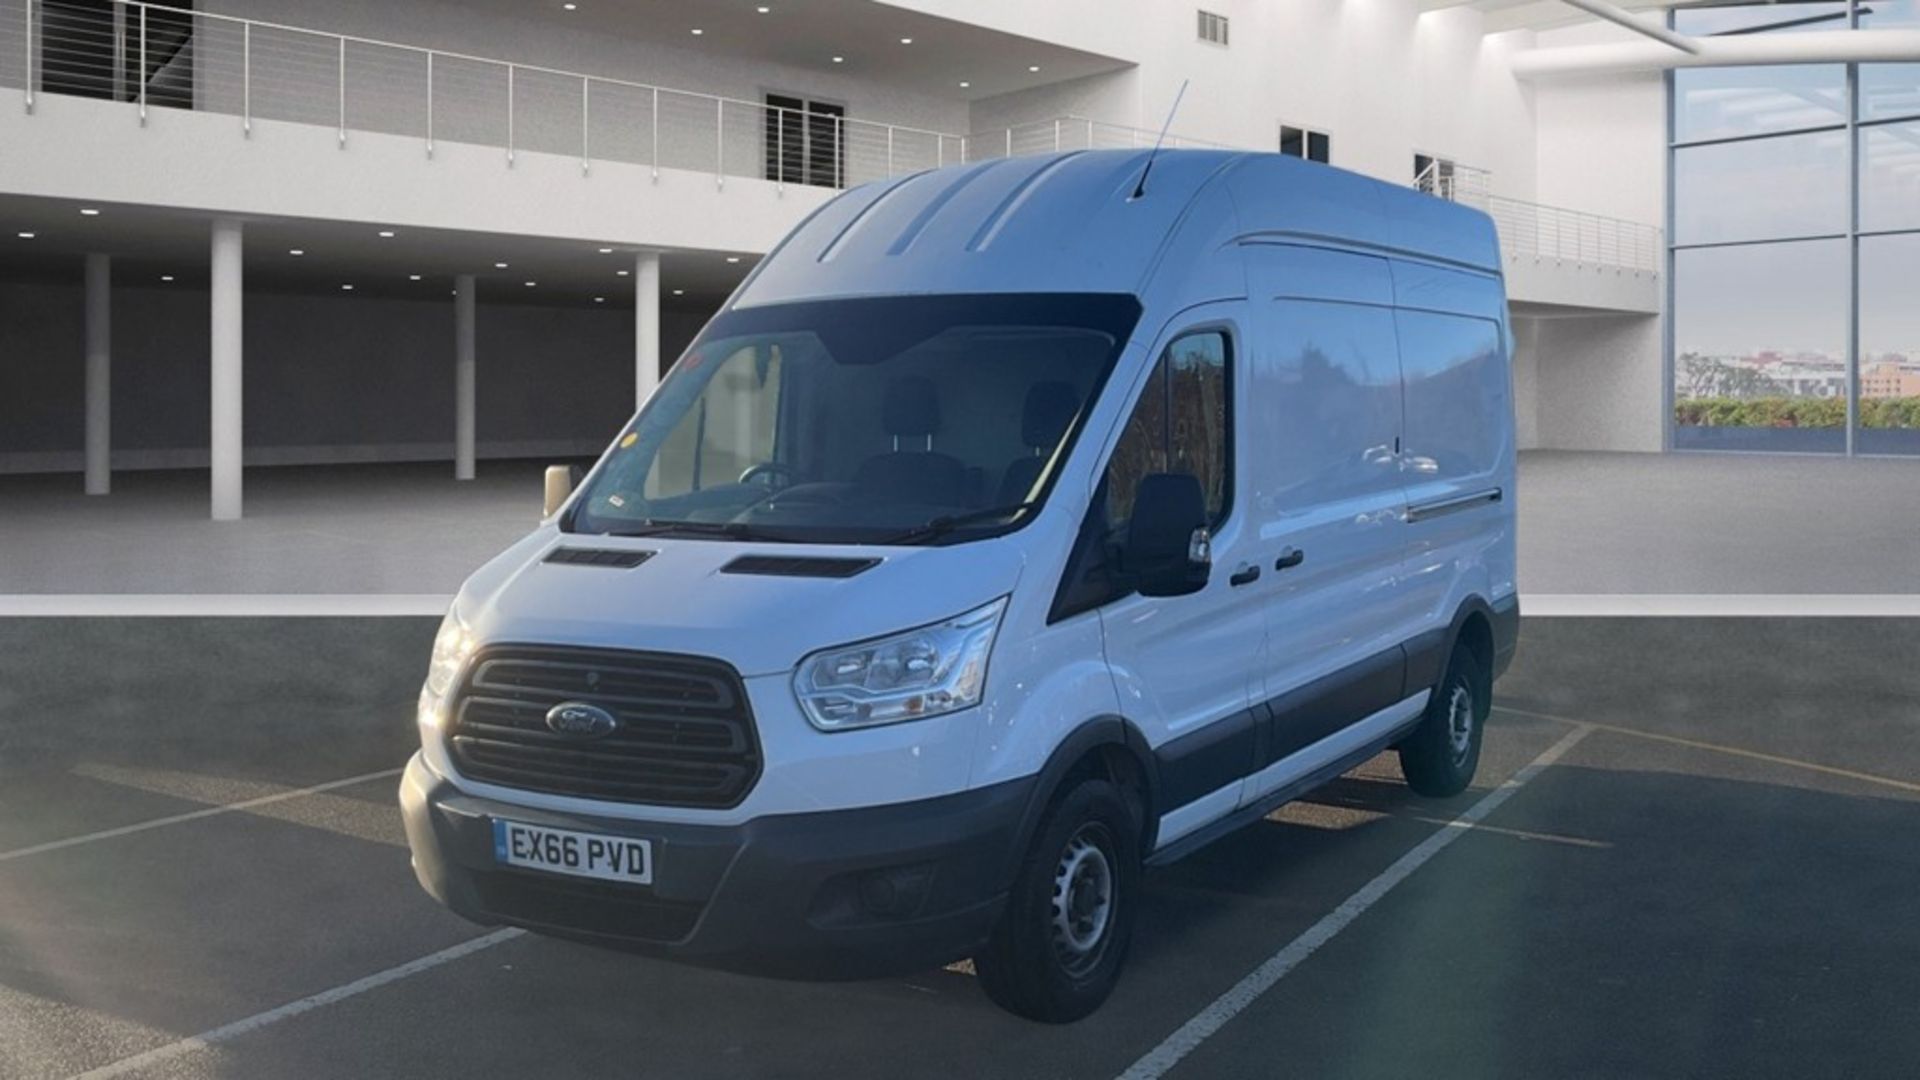 ** ON SALE ** Ford Transit 2.2 TDCI 125 L3 H3 2016 '66 Reg' - ULEZ Compliant - Only 90,368 Miles - Image 2 of 8